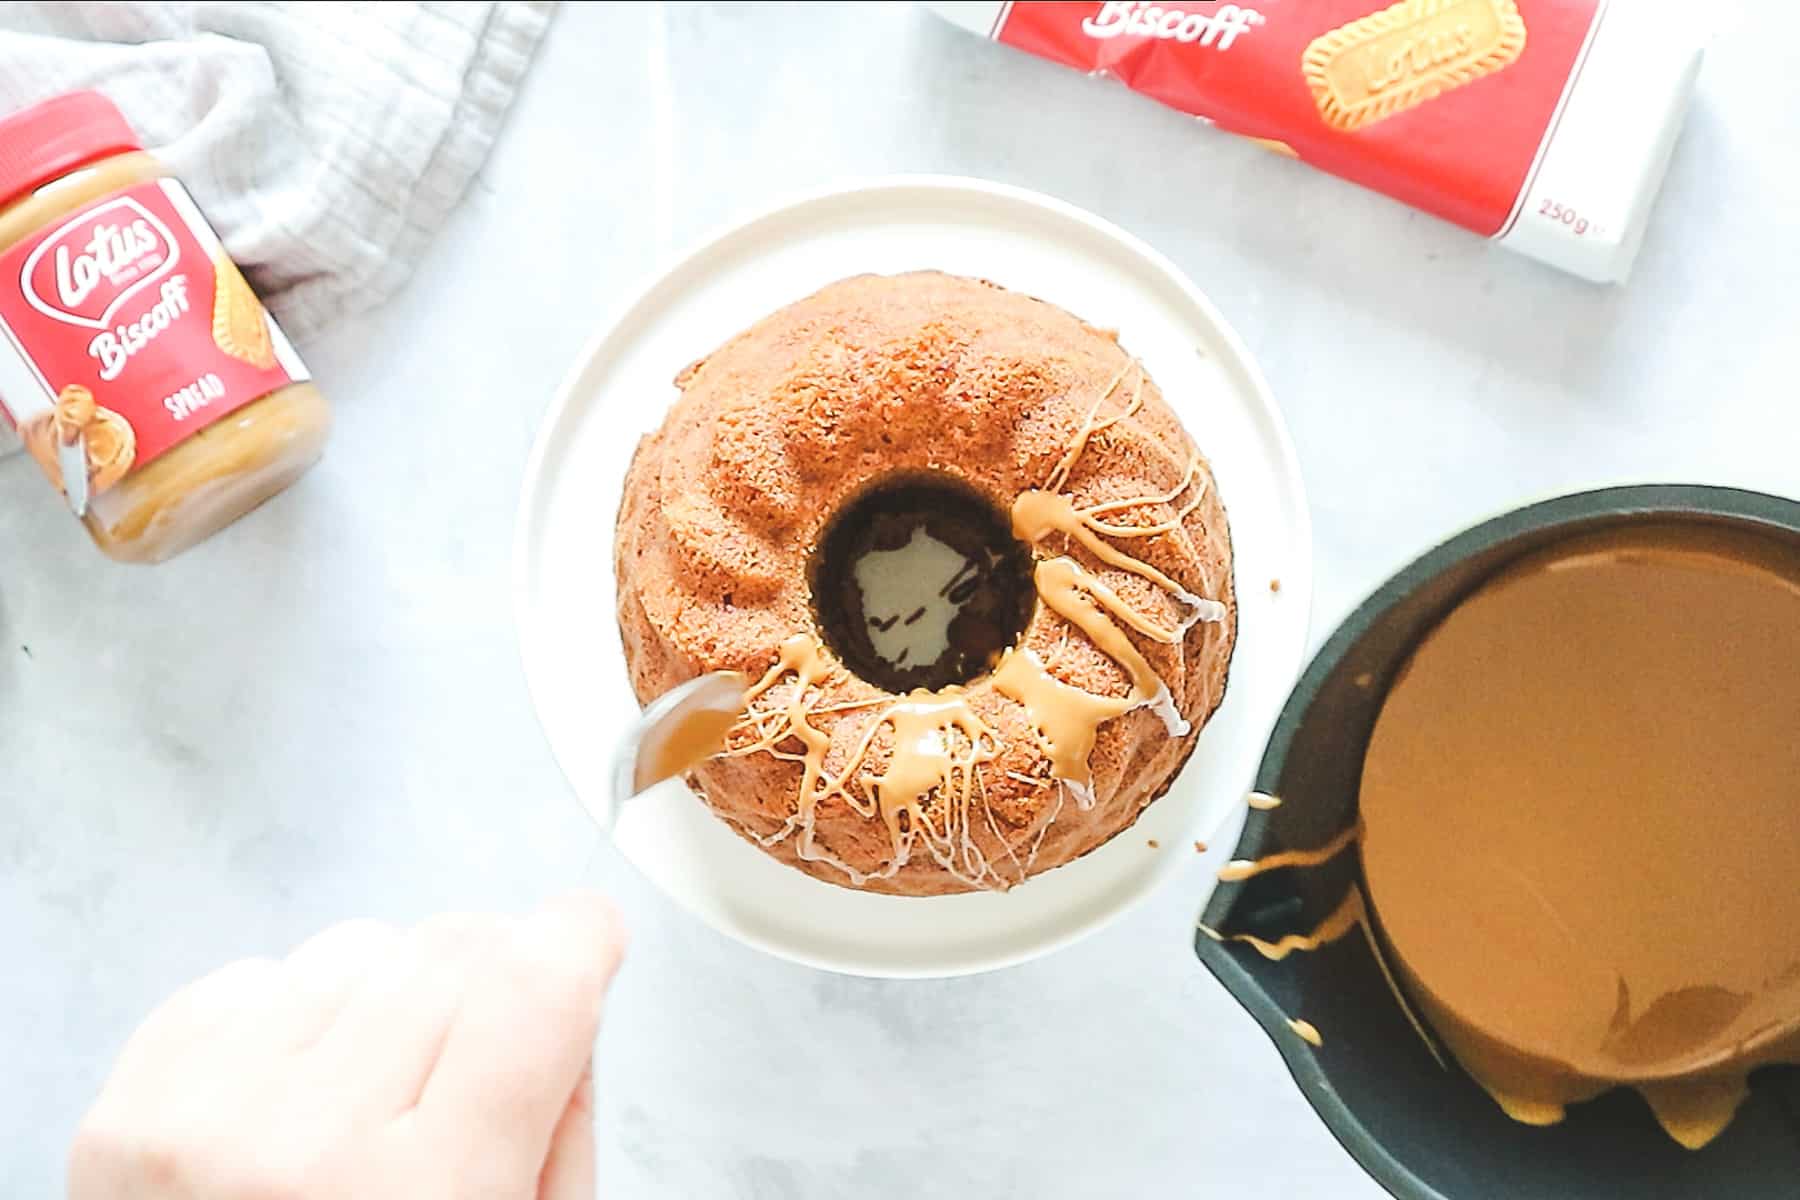 Drizzling melted Biscoff glaze over the top of the Bundt cake